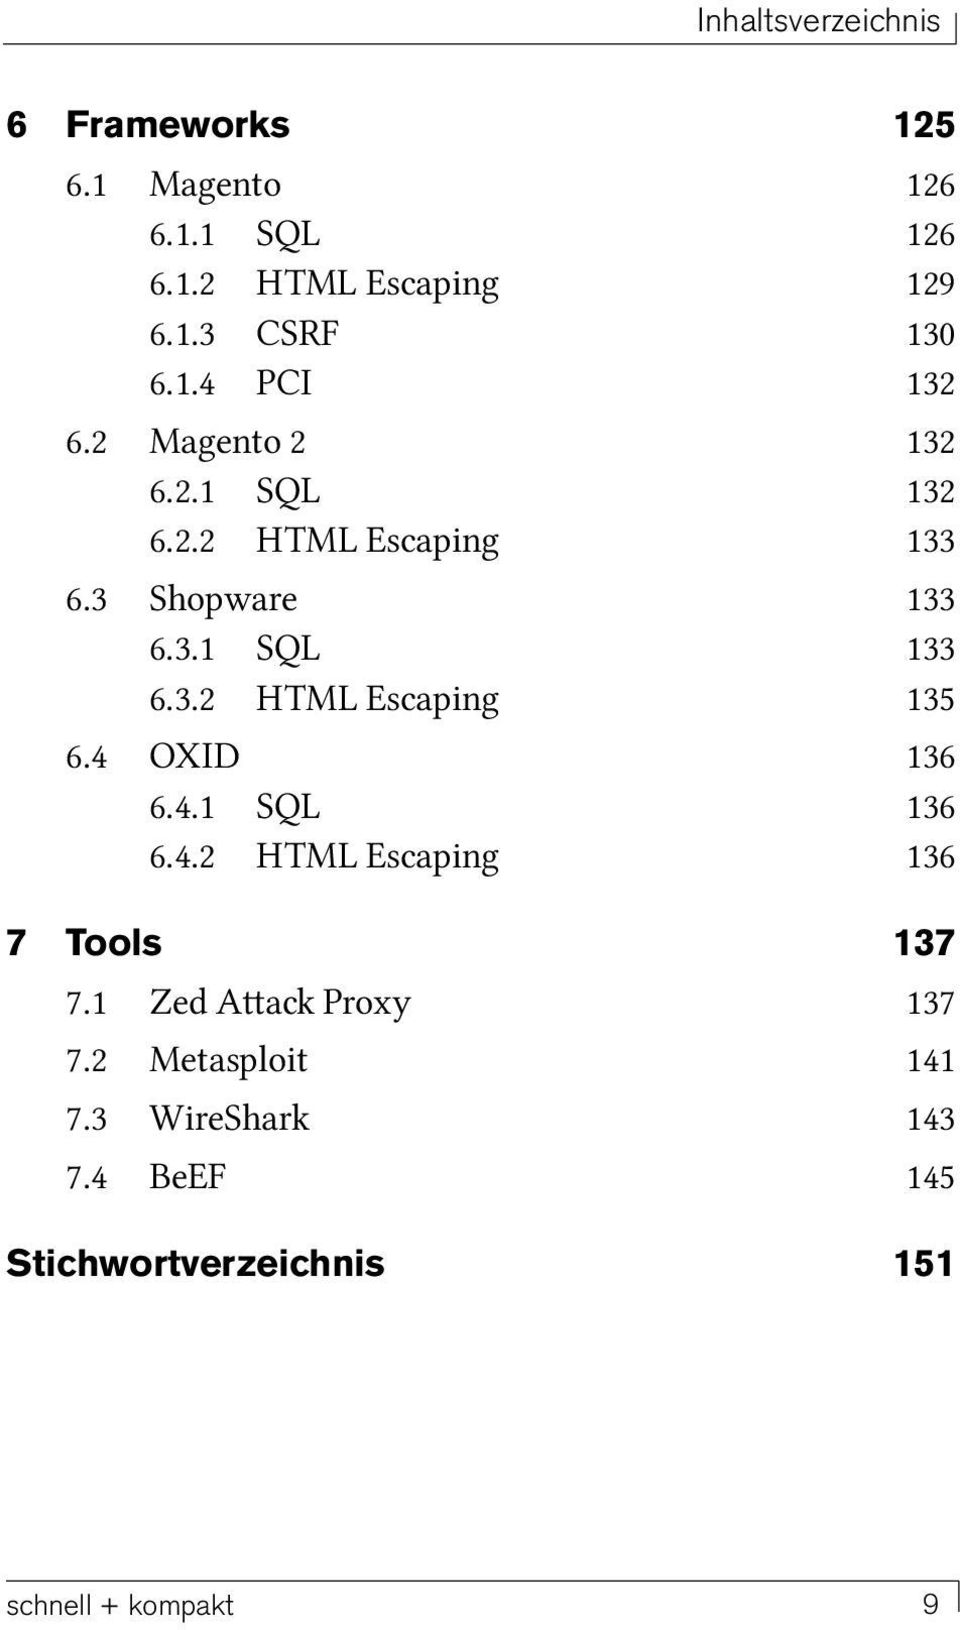 4 OXID 136 6.4.1 SQL 136 6.4.2 HTML Escaping 136 7 Tools 137 7.1 Zed Attack Proxy 137 7.